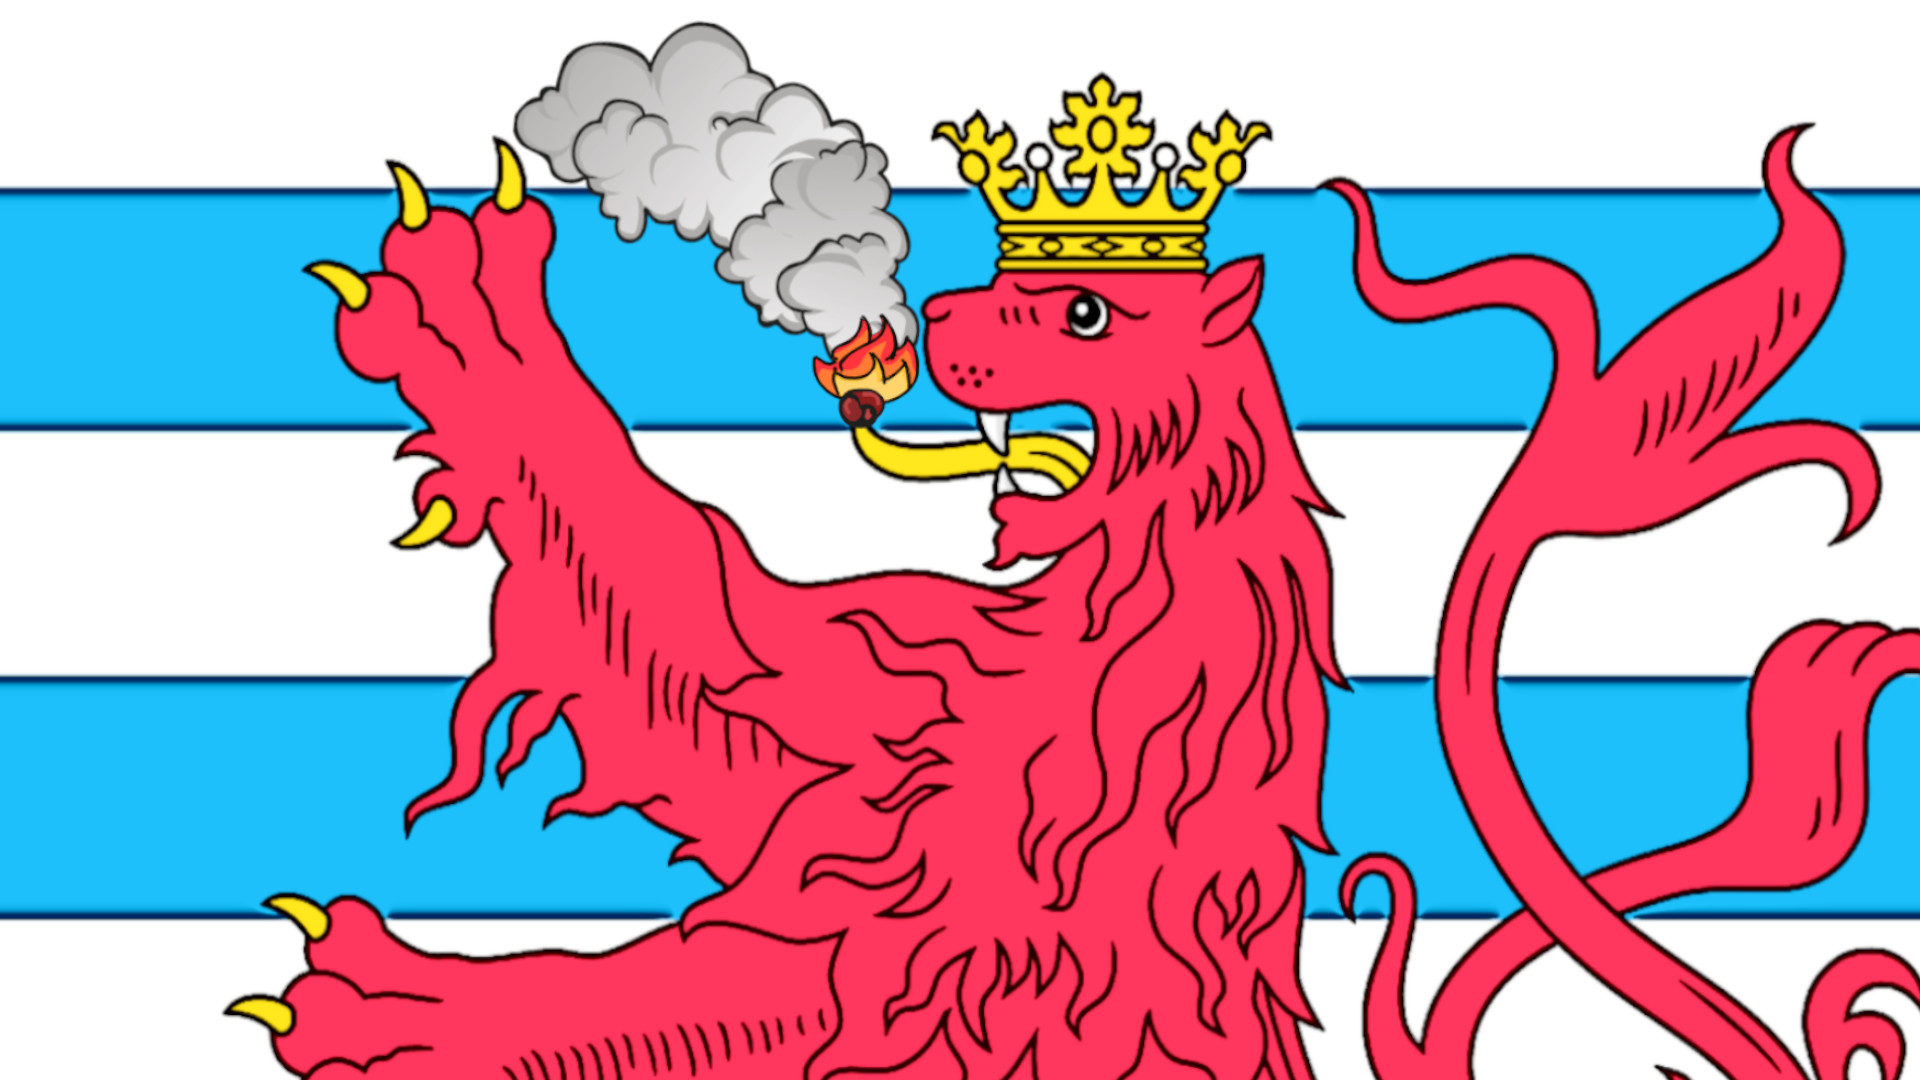 Red lion of Luxembourg burning tongue